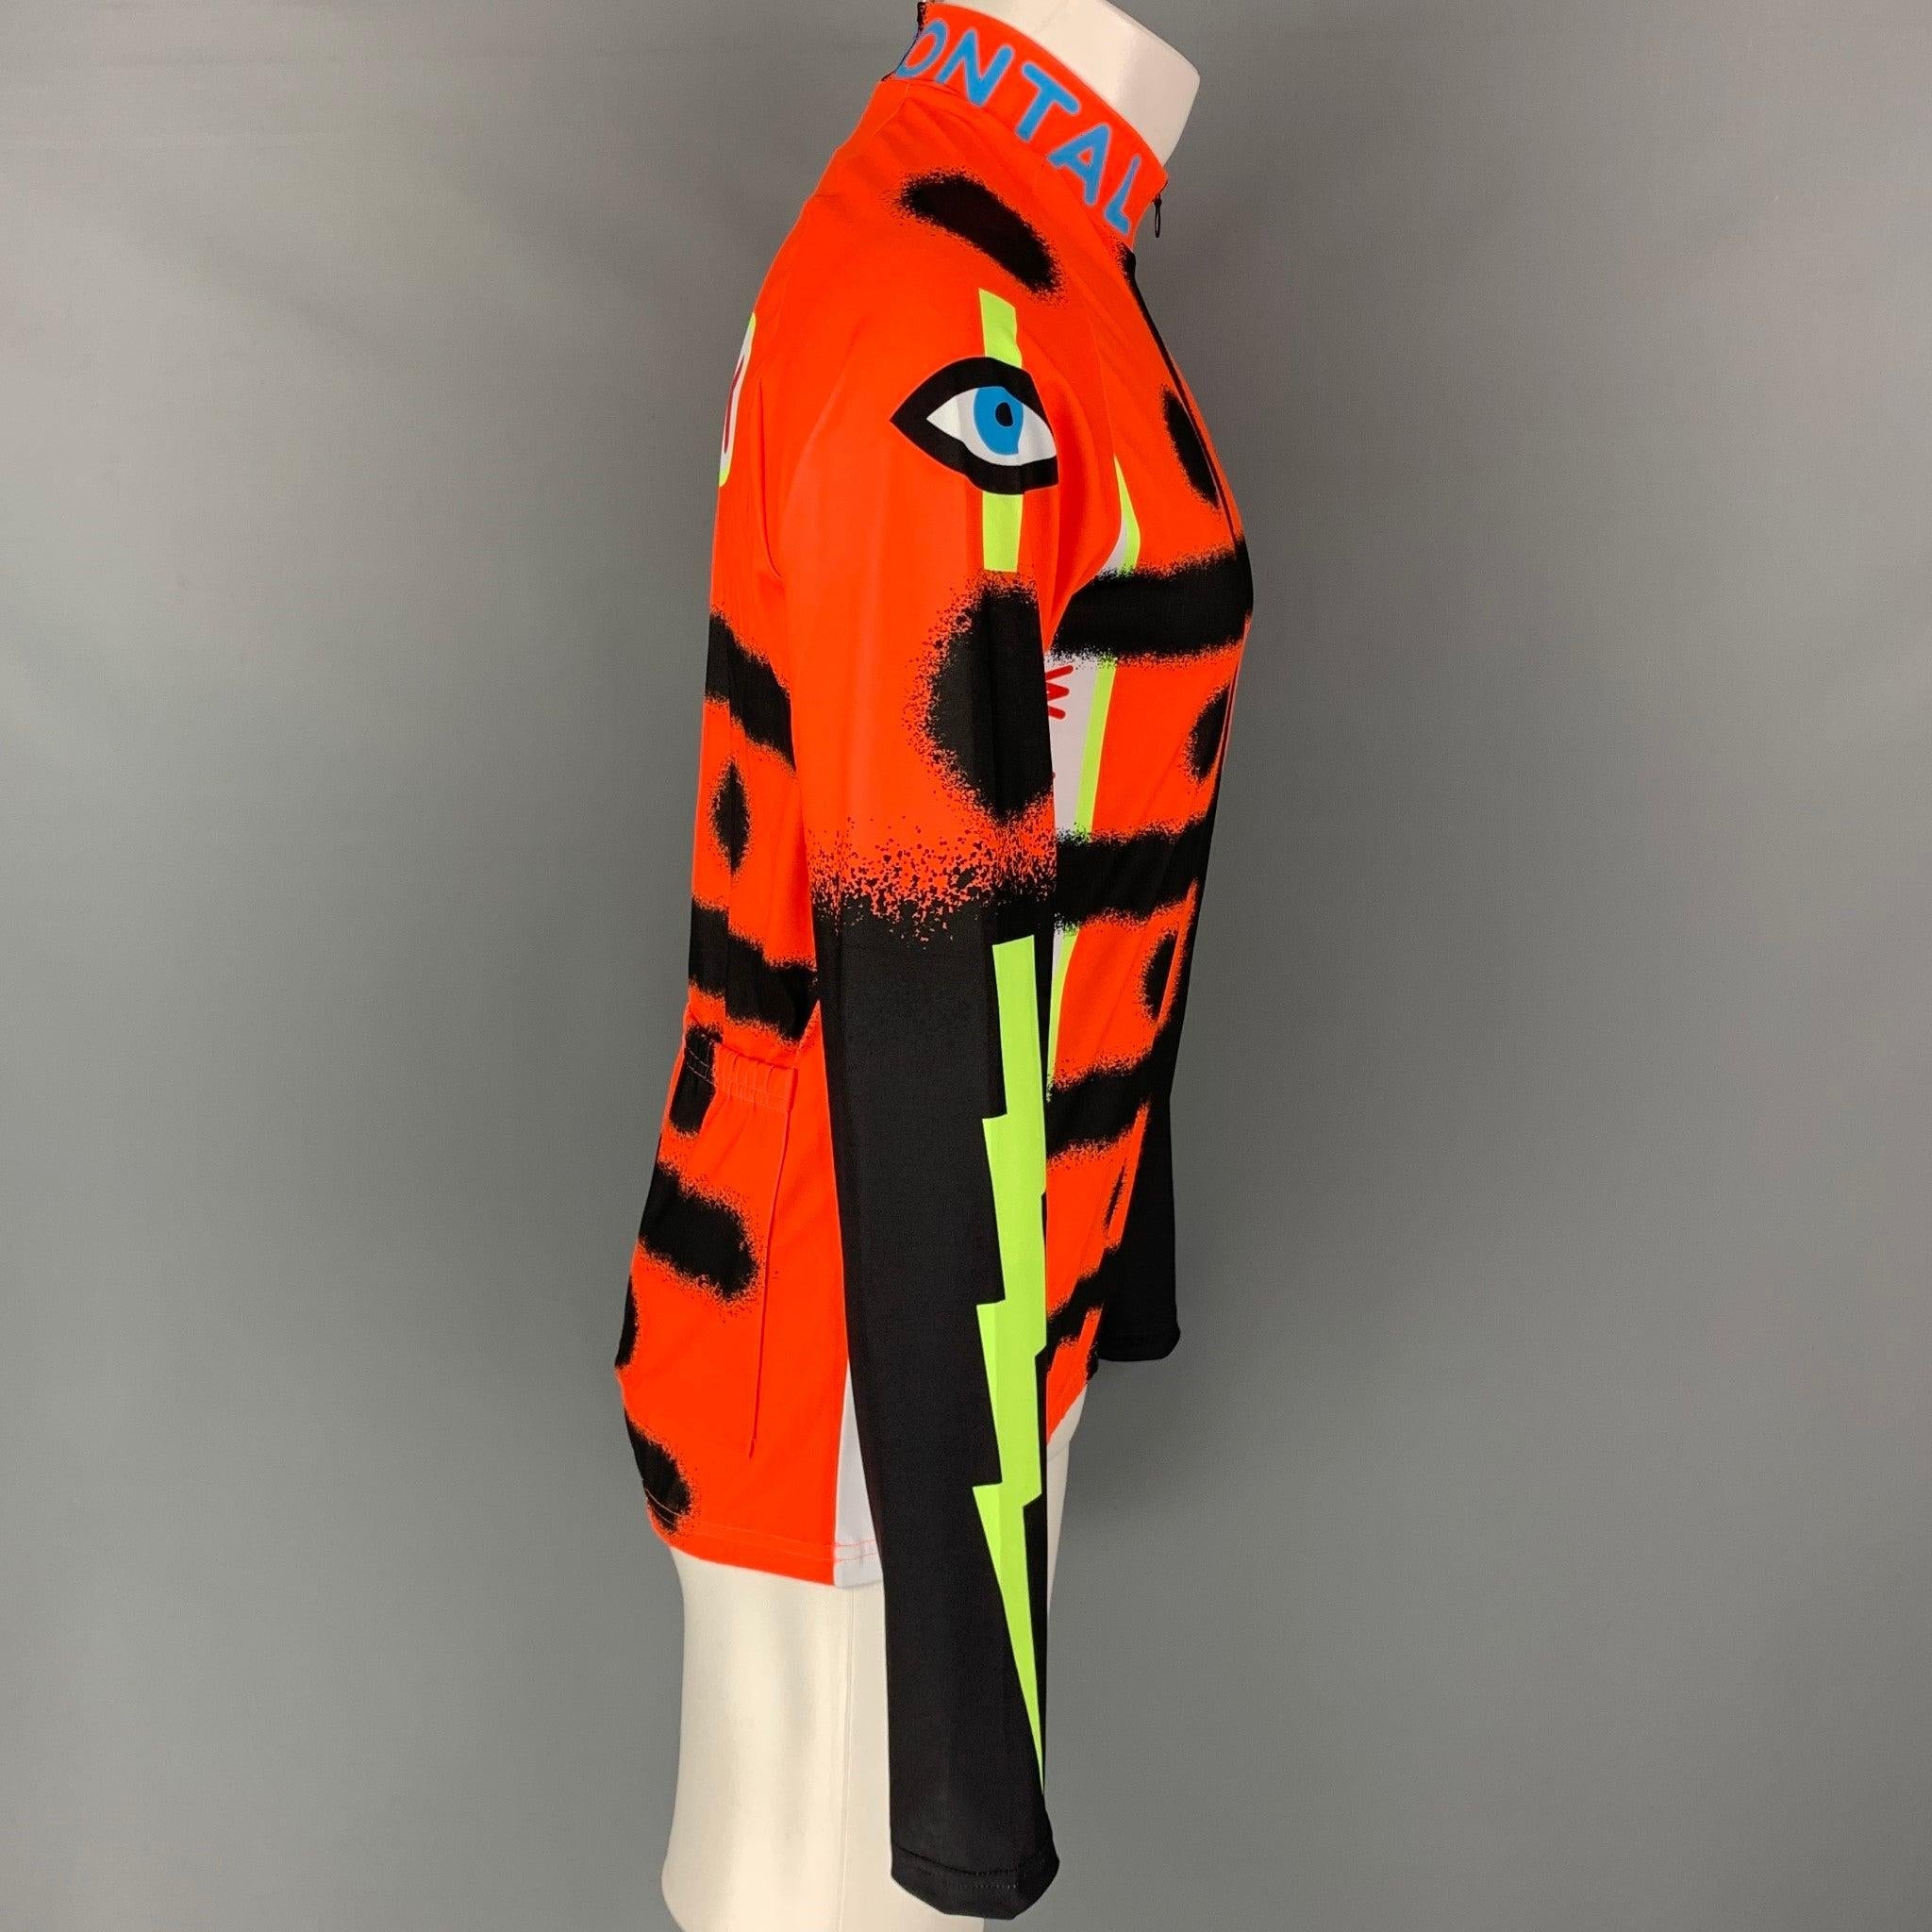 Walter Van Beirendonck Cycle Biker Jersey Pullover Top from Spring Summer 2022 Neon Shadow collection. Features a quarter zip graphic print design, collar and back pockets.Introduced as part of Walter Van Beirendonck’s W< collections during the